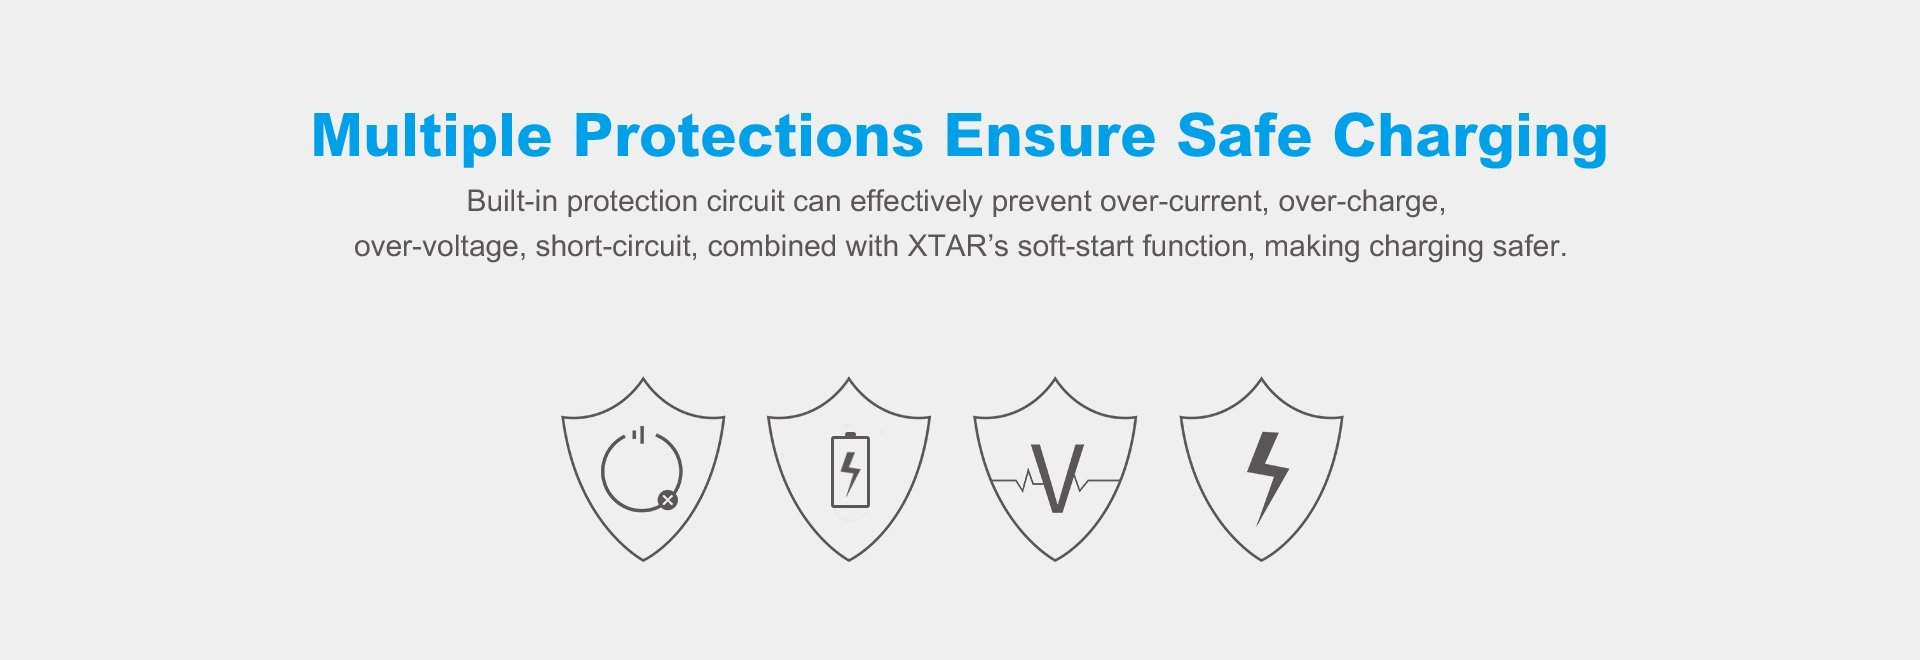 XTAR PB2S multiple protections ensure safe charging